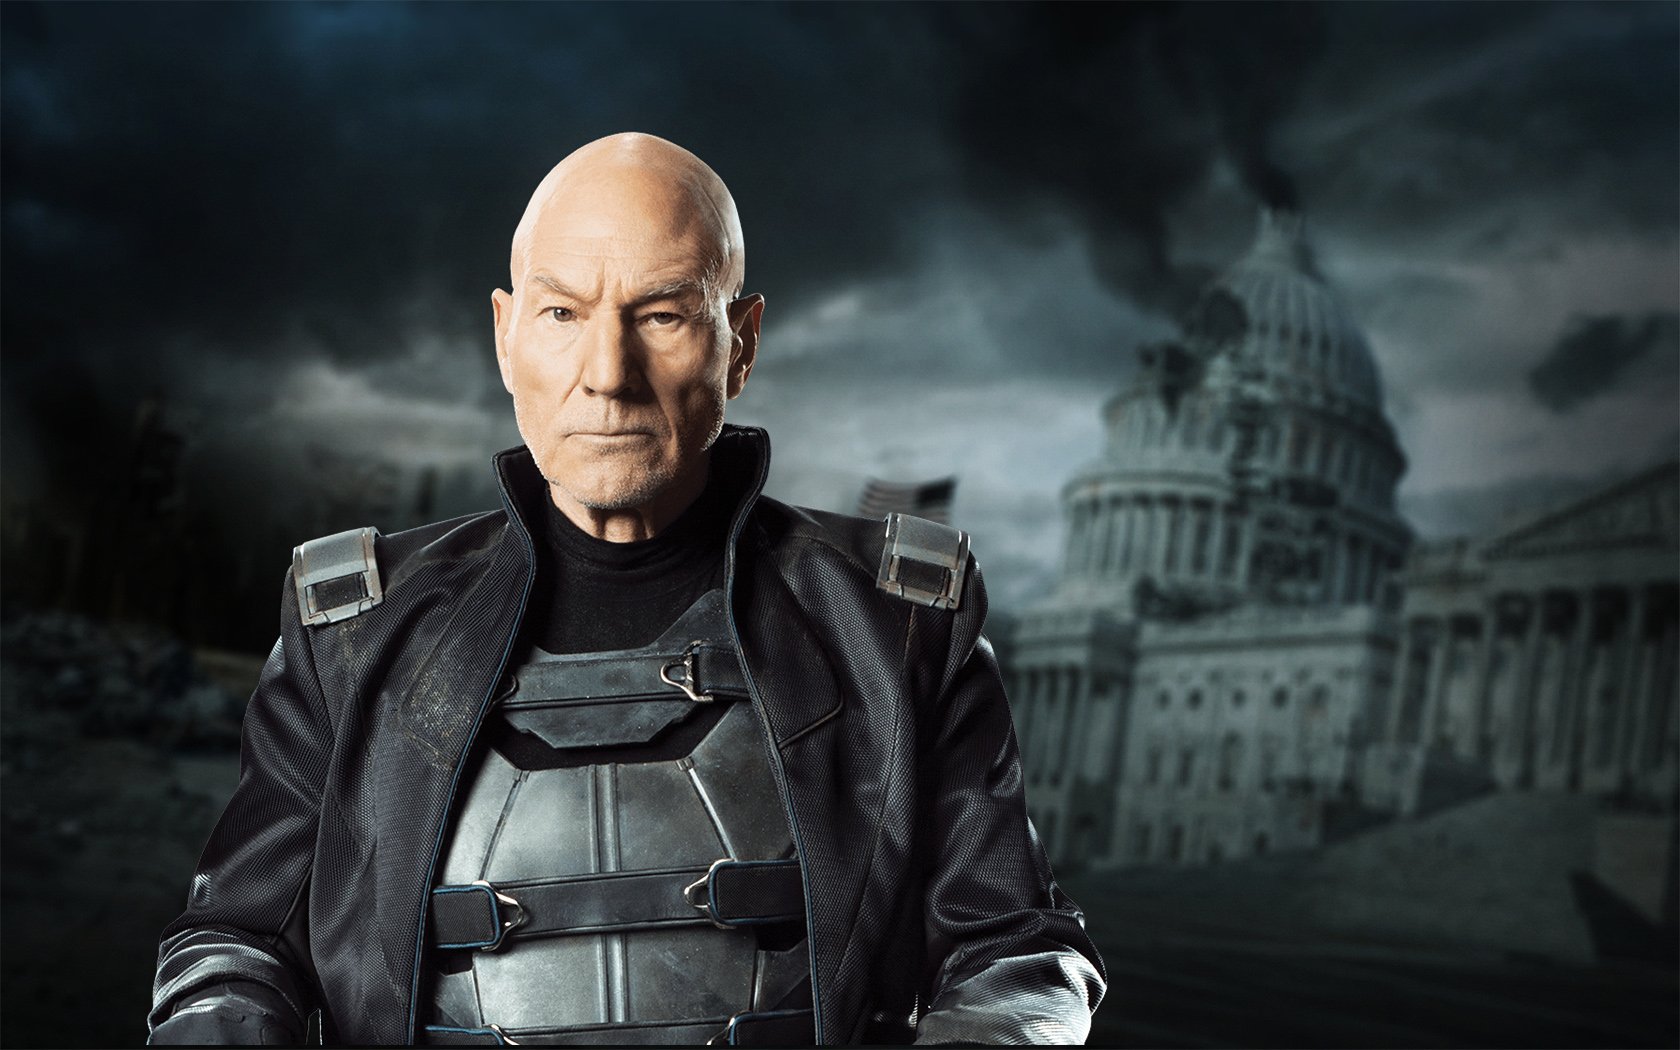 Old Professor Xavier Played By Patrick Stewart Wallpaper and